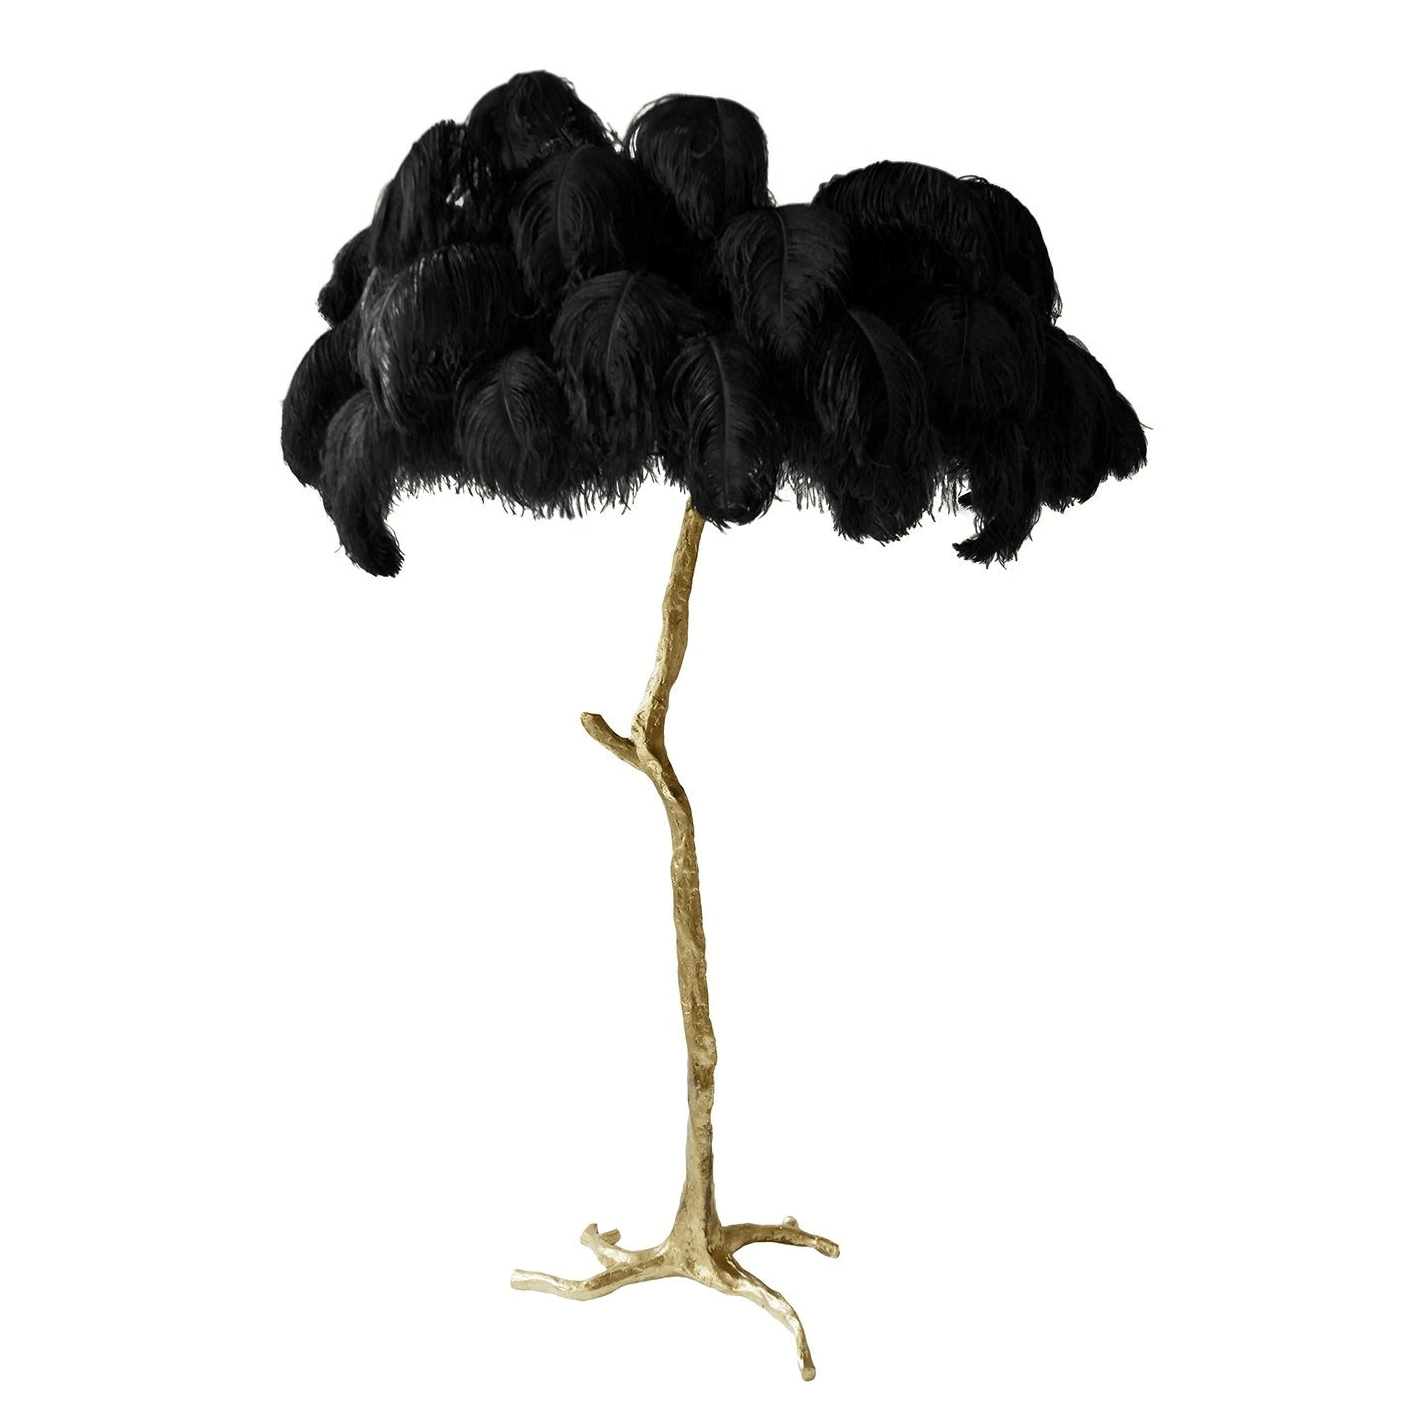 Brass Floor Lamp with Ostrich Feather Shade: Ø 39.4" x H 63" (100cm x 160cm), Polished Brass and Black